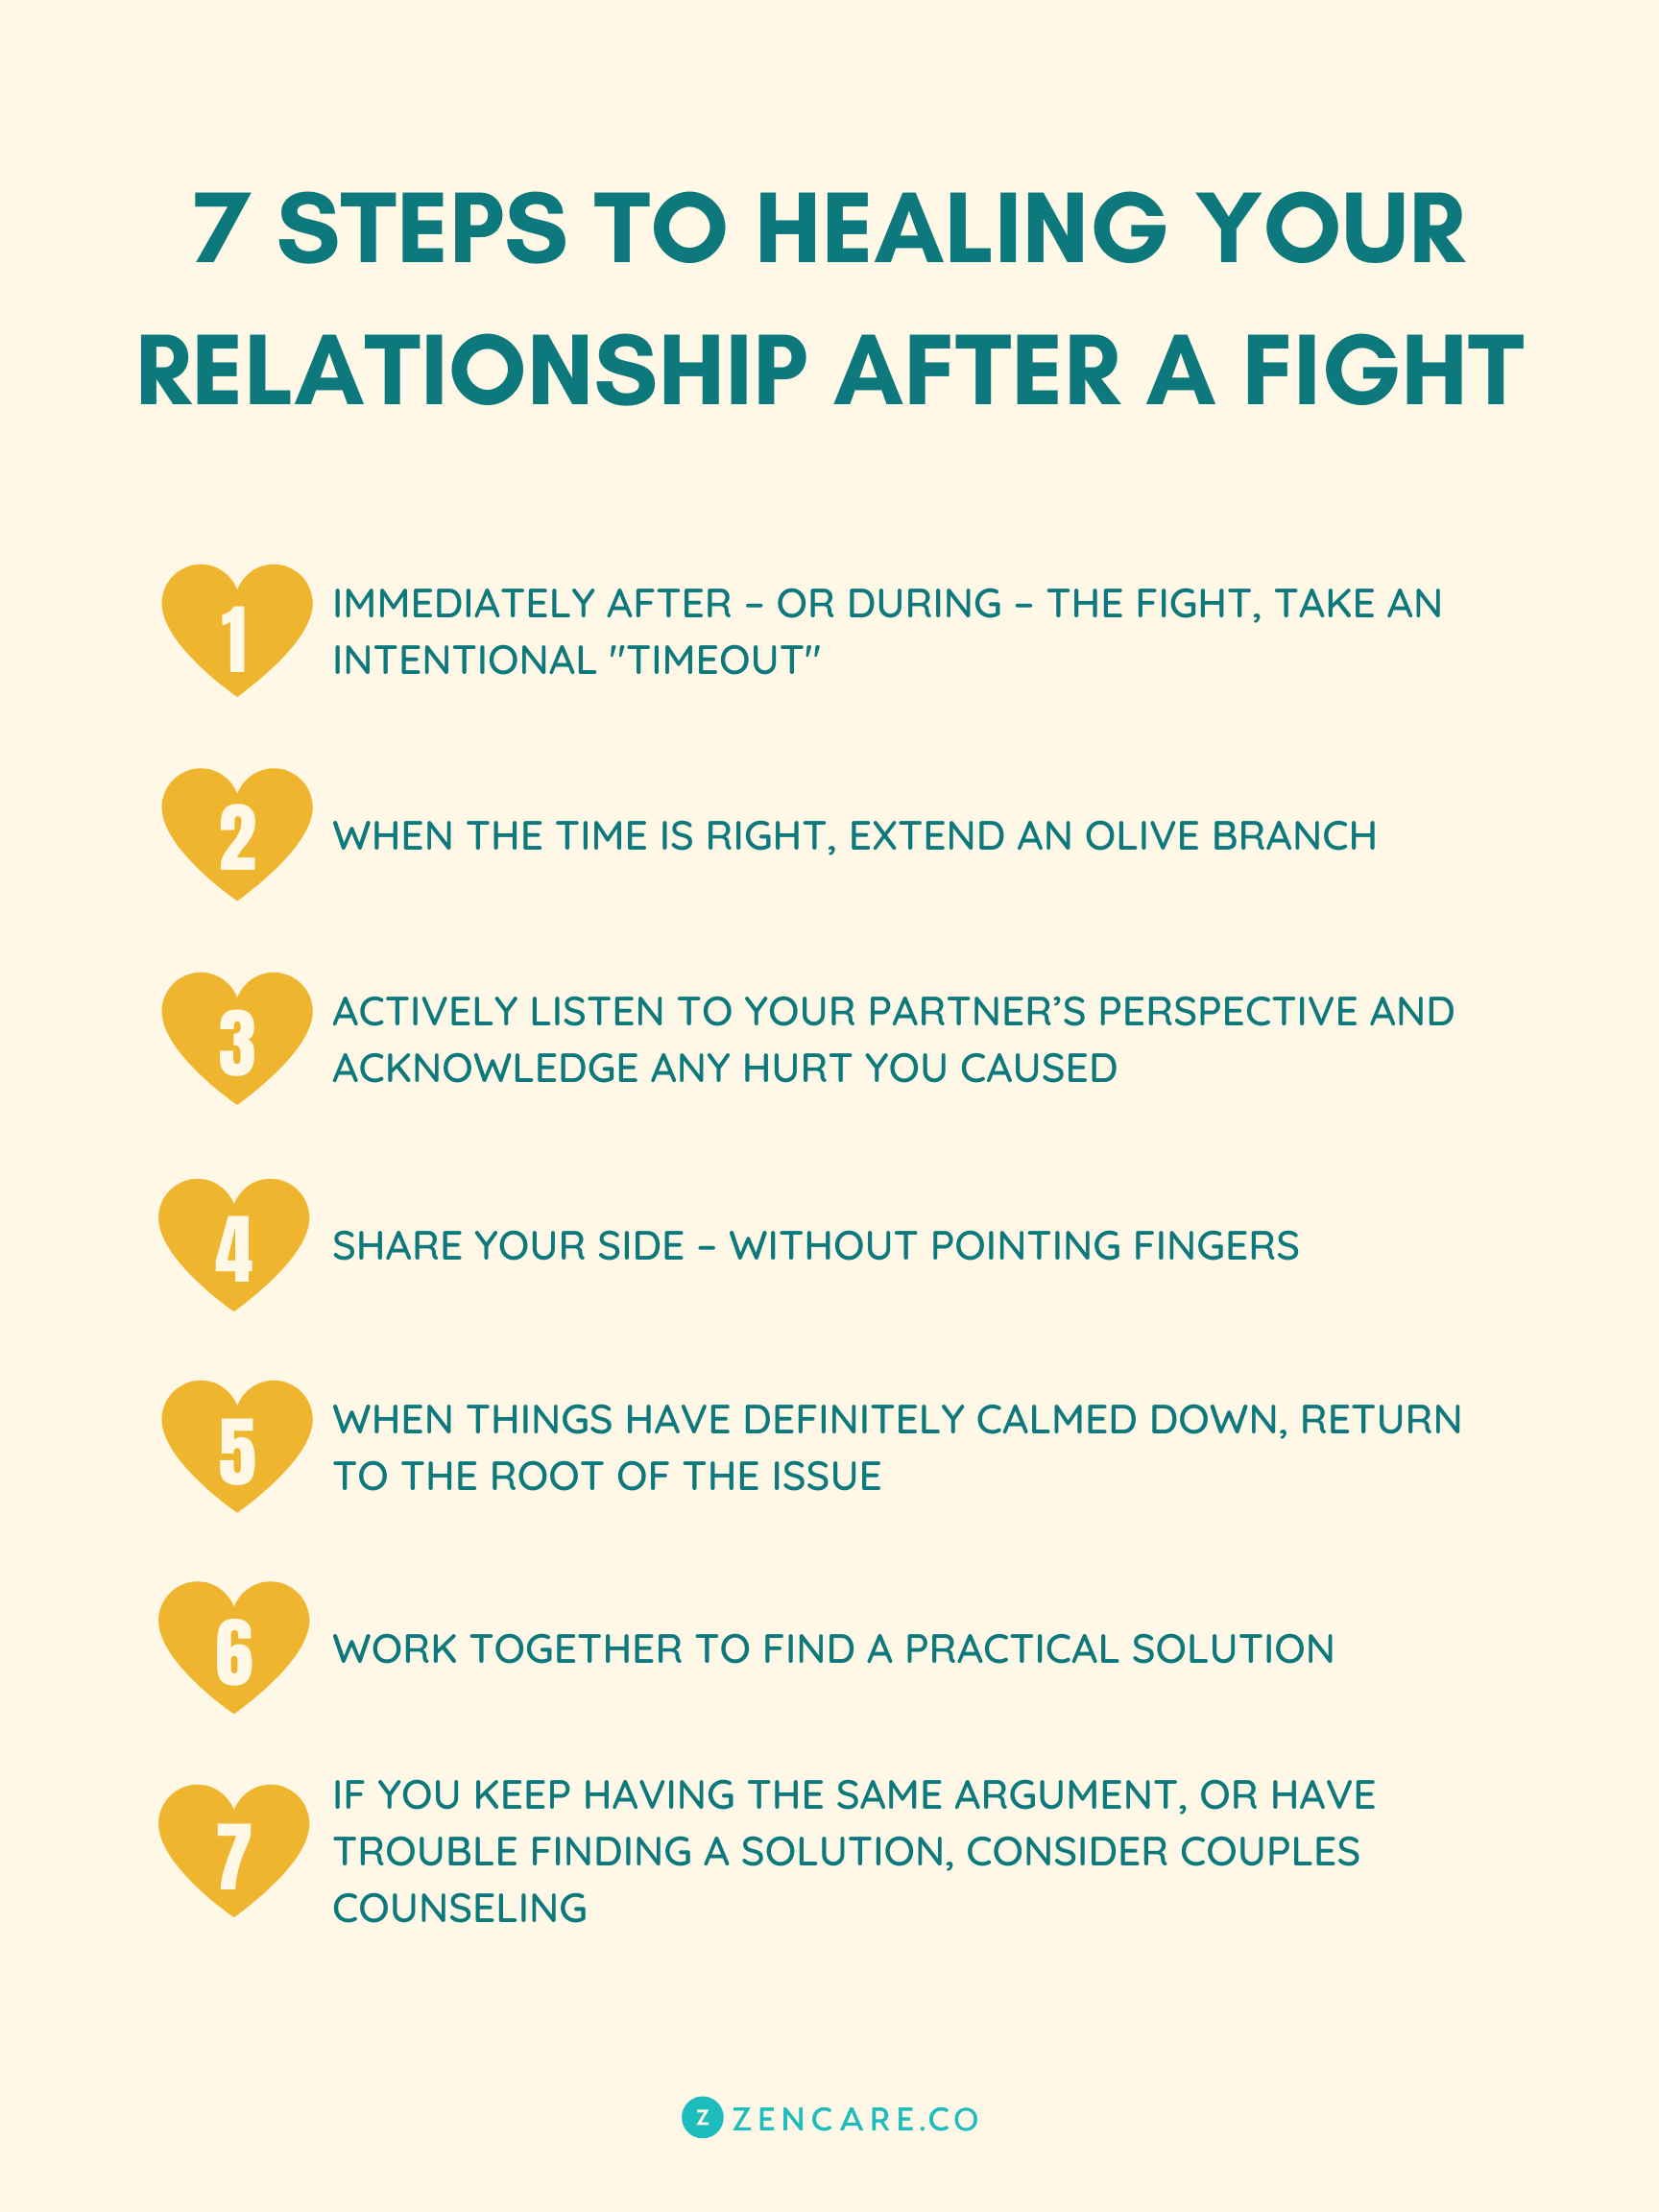 7 Steps to Healing Your Relationship After a Fight Guide by Zencare